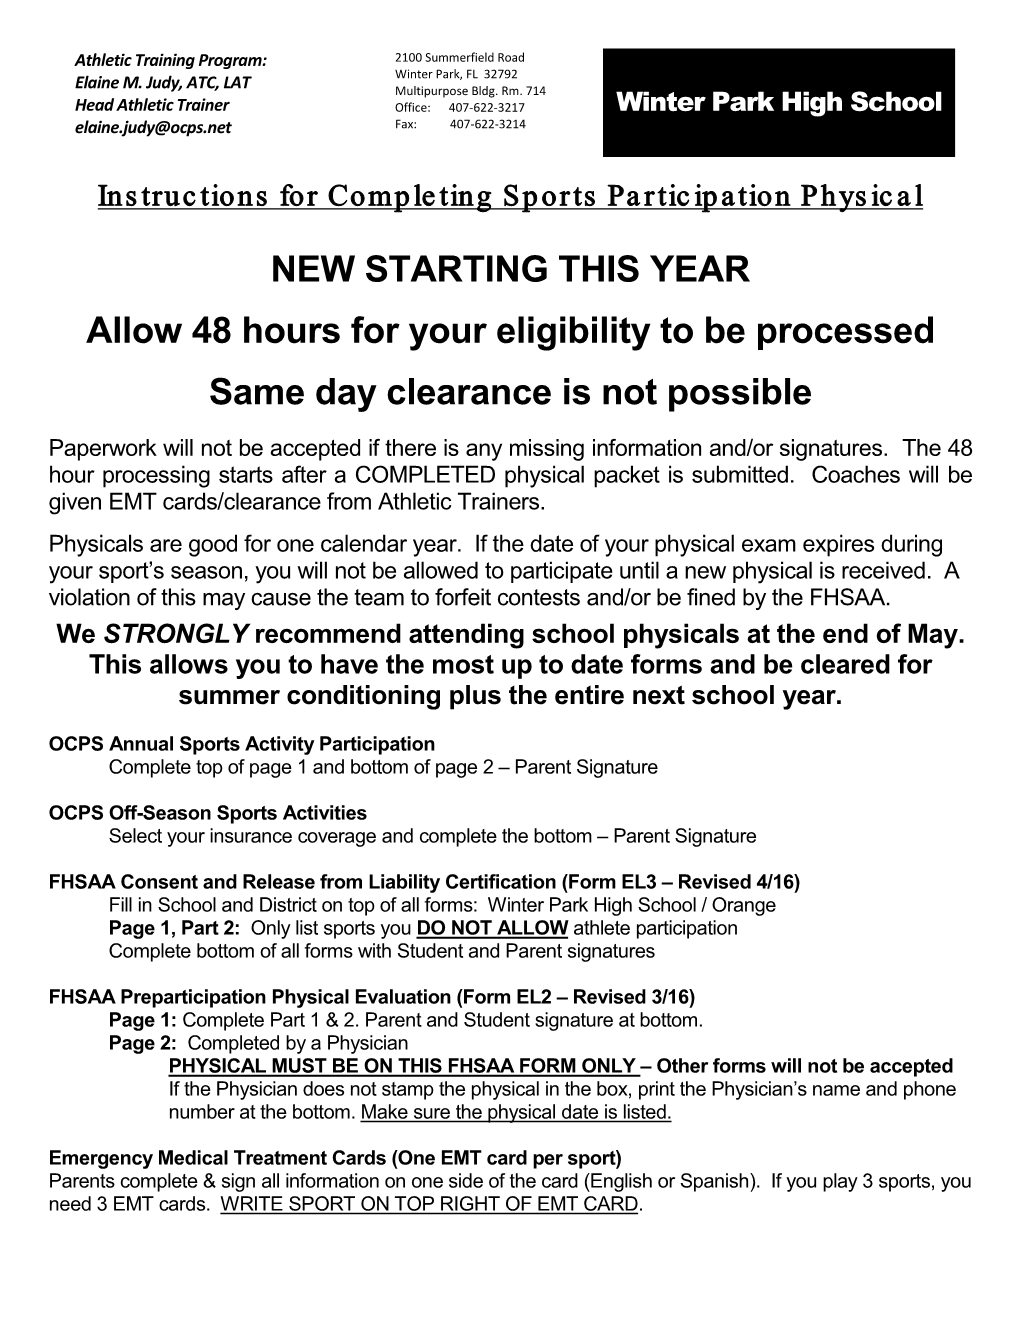 NEW STARTING THIS YEAR Allow 48 Hours for Your Eligibility to Be